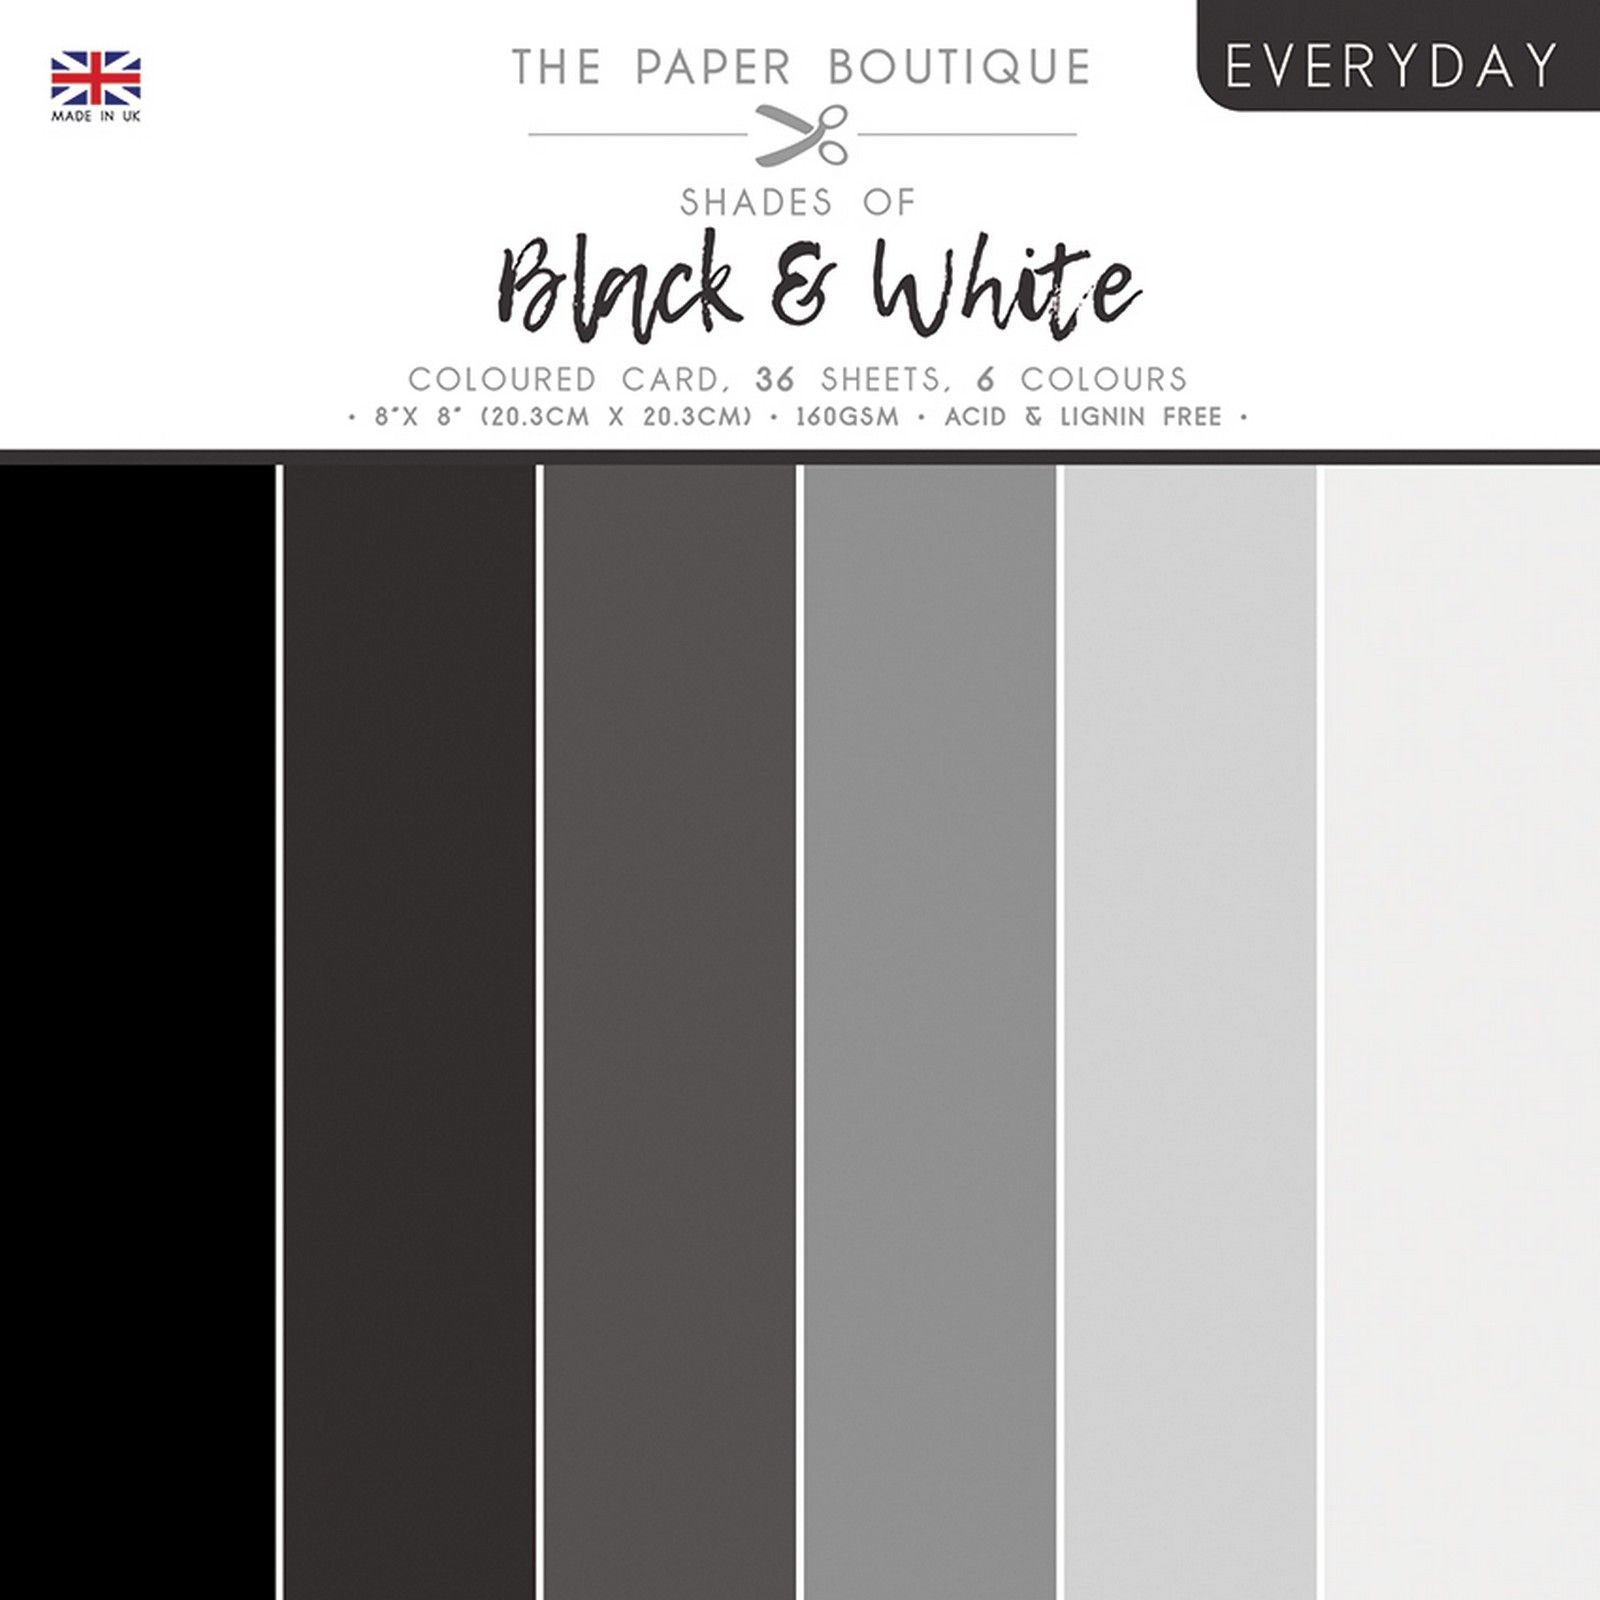 The Paper Boutique • Everyday shades of black & white coloured card 